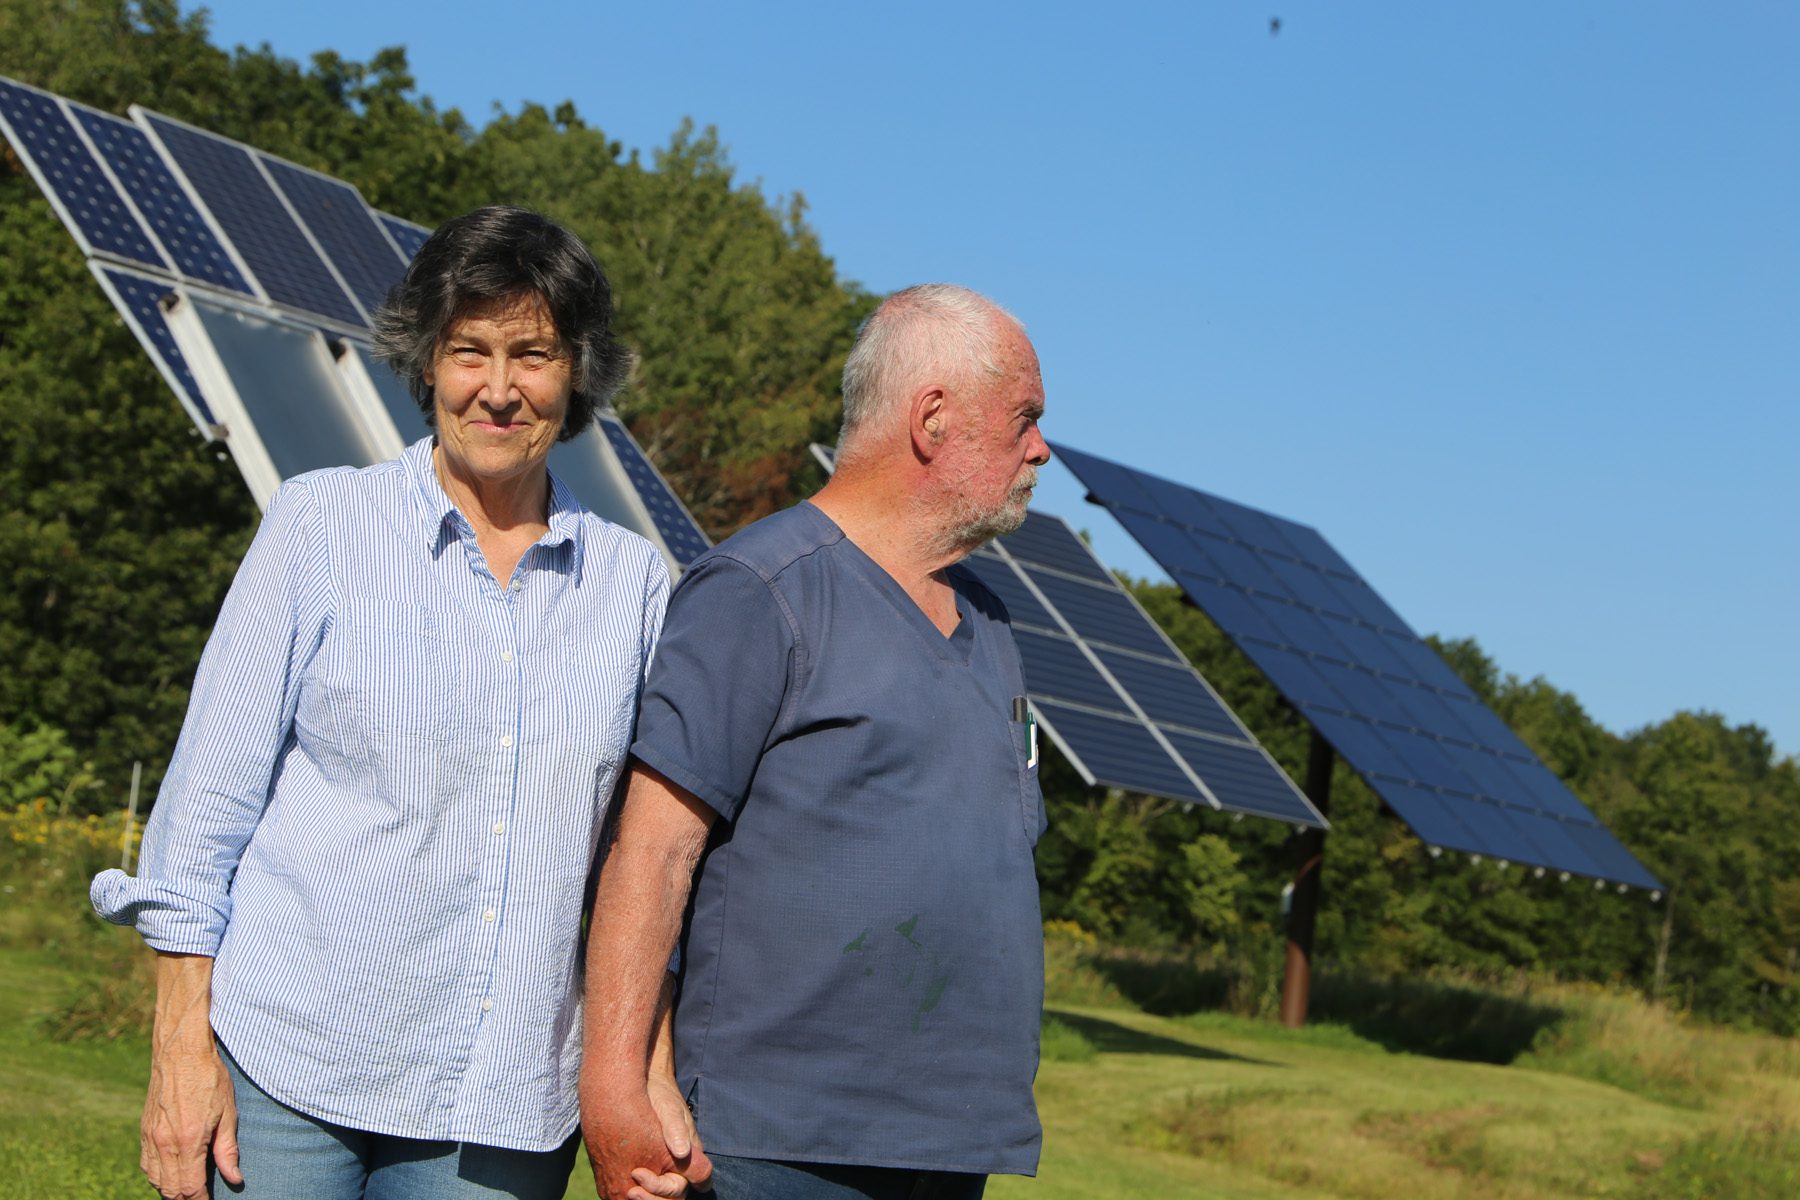 Sarah Johnston and Dave Smalley stand in front of their solar panels.